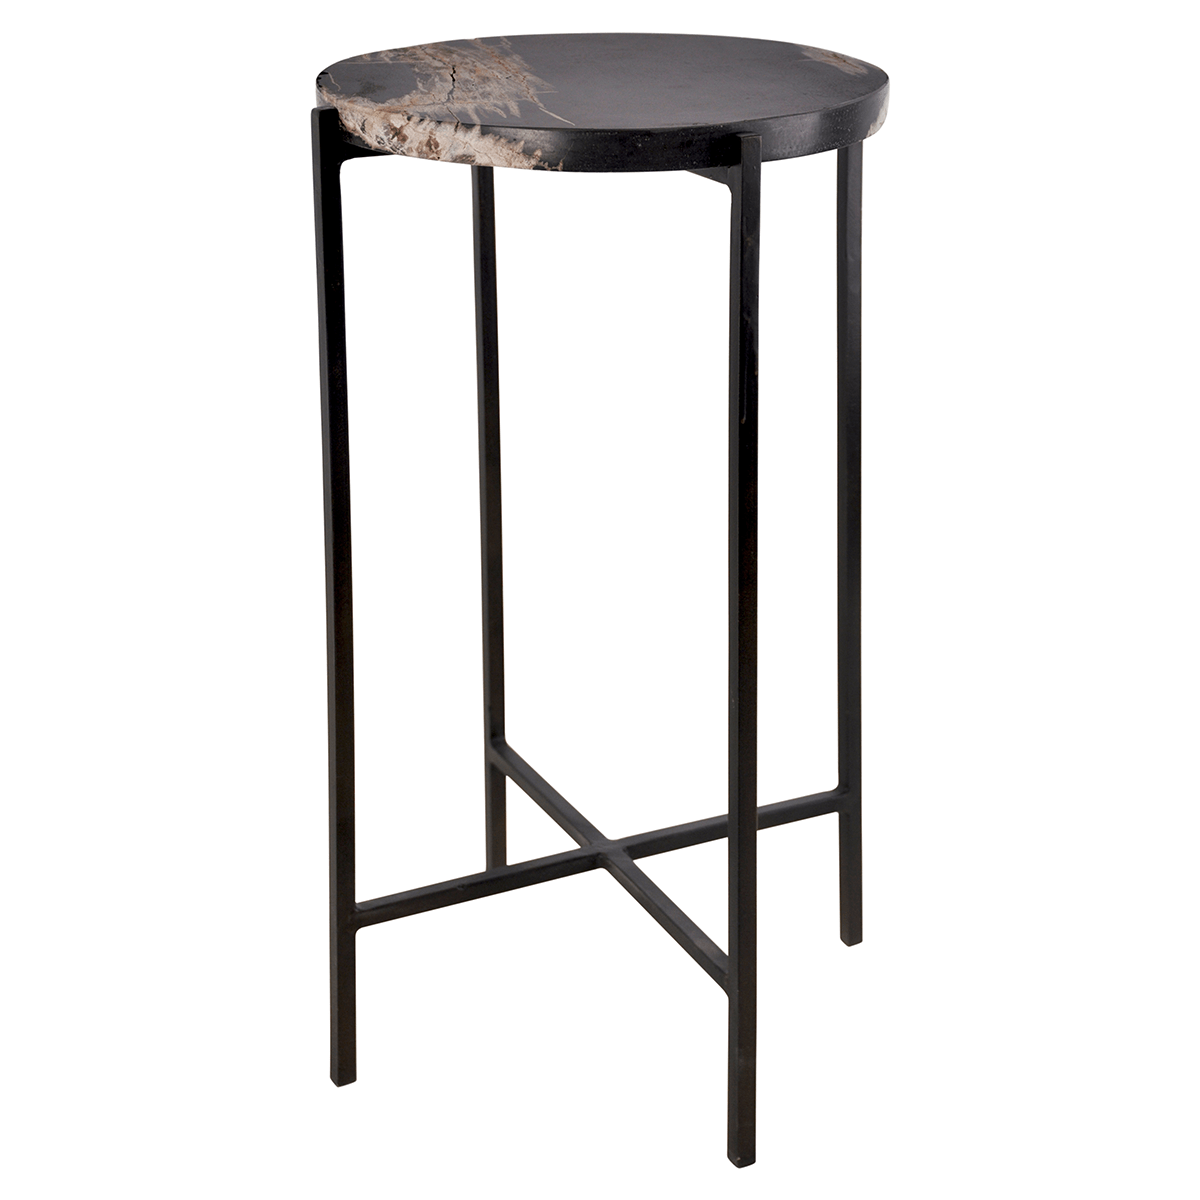 Oly Studio Agatha Round Side Table Furniture oly-merced-round-side-table